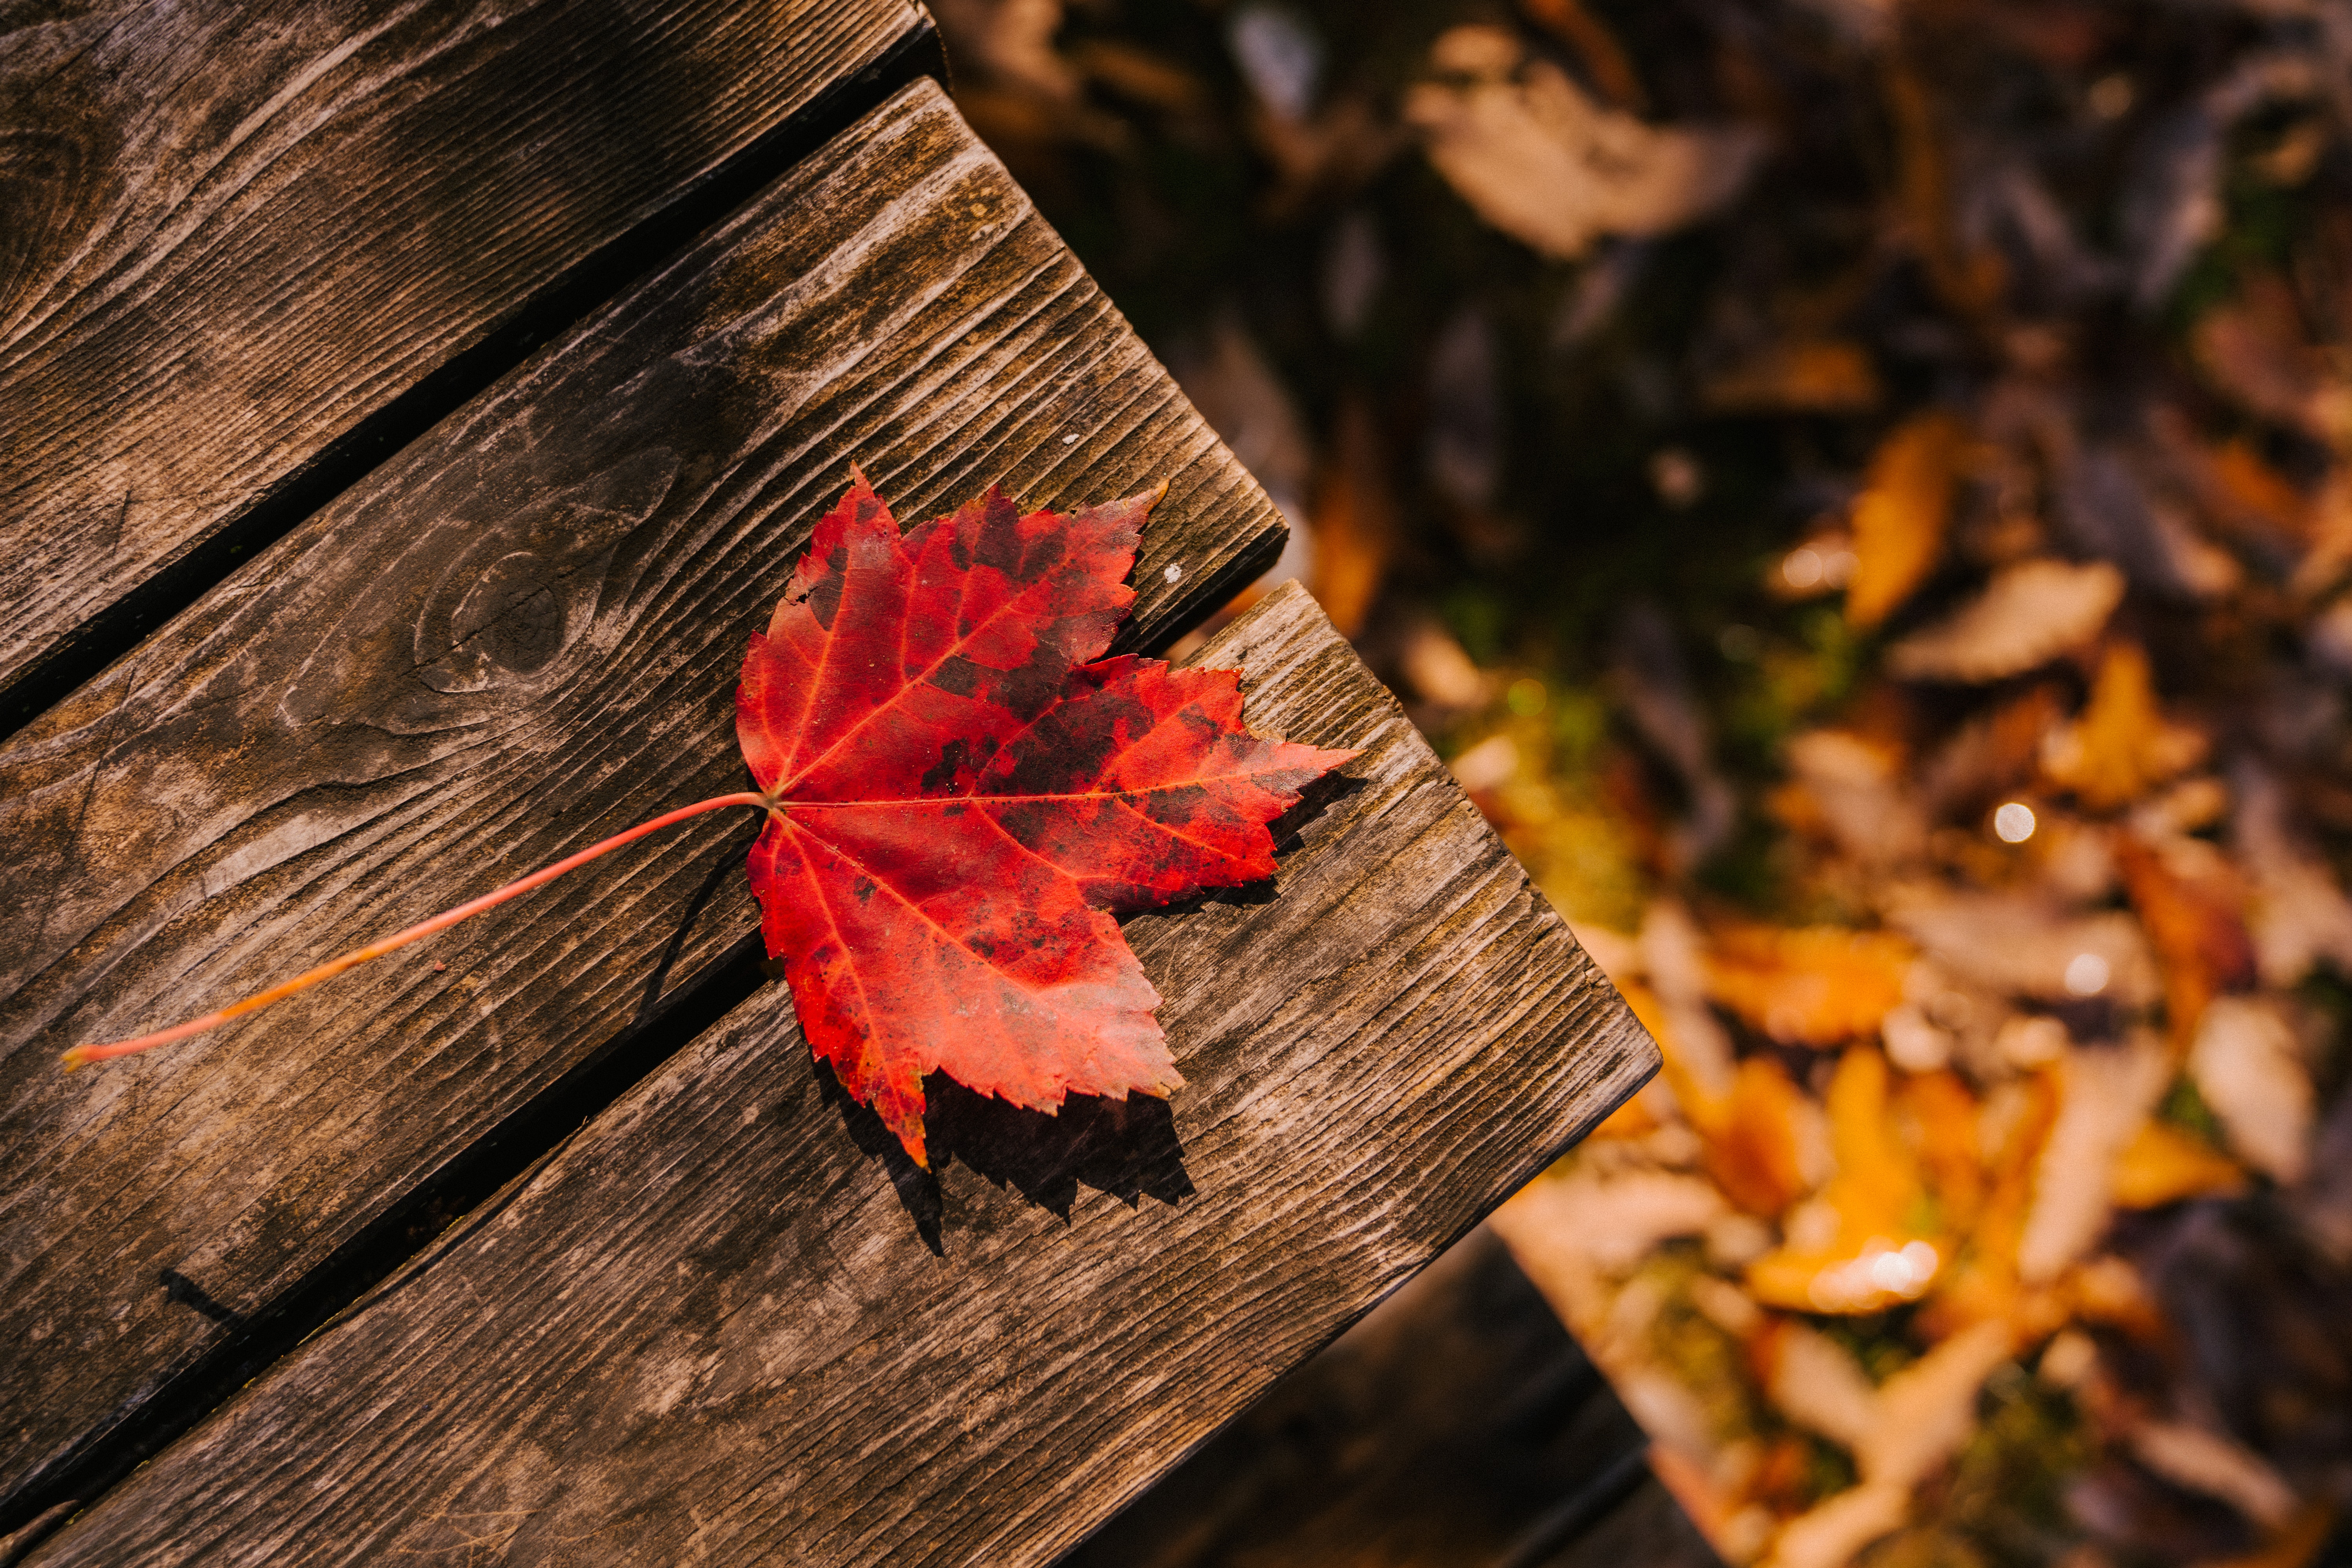 A maple leaf on a wooden picnic table in fall